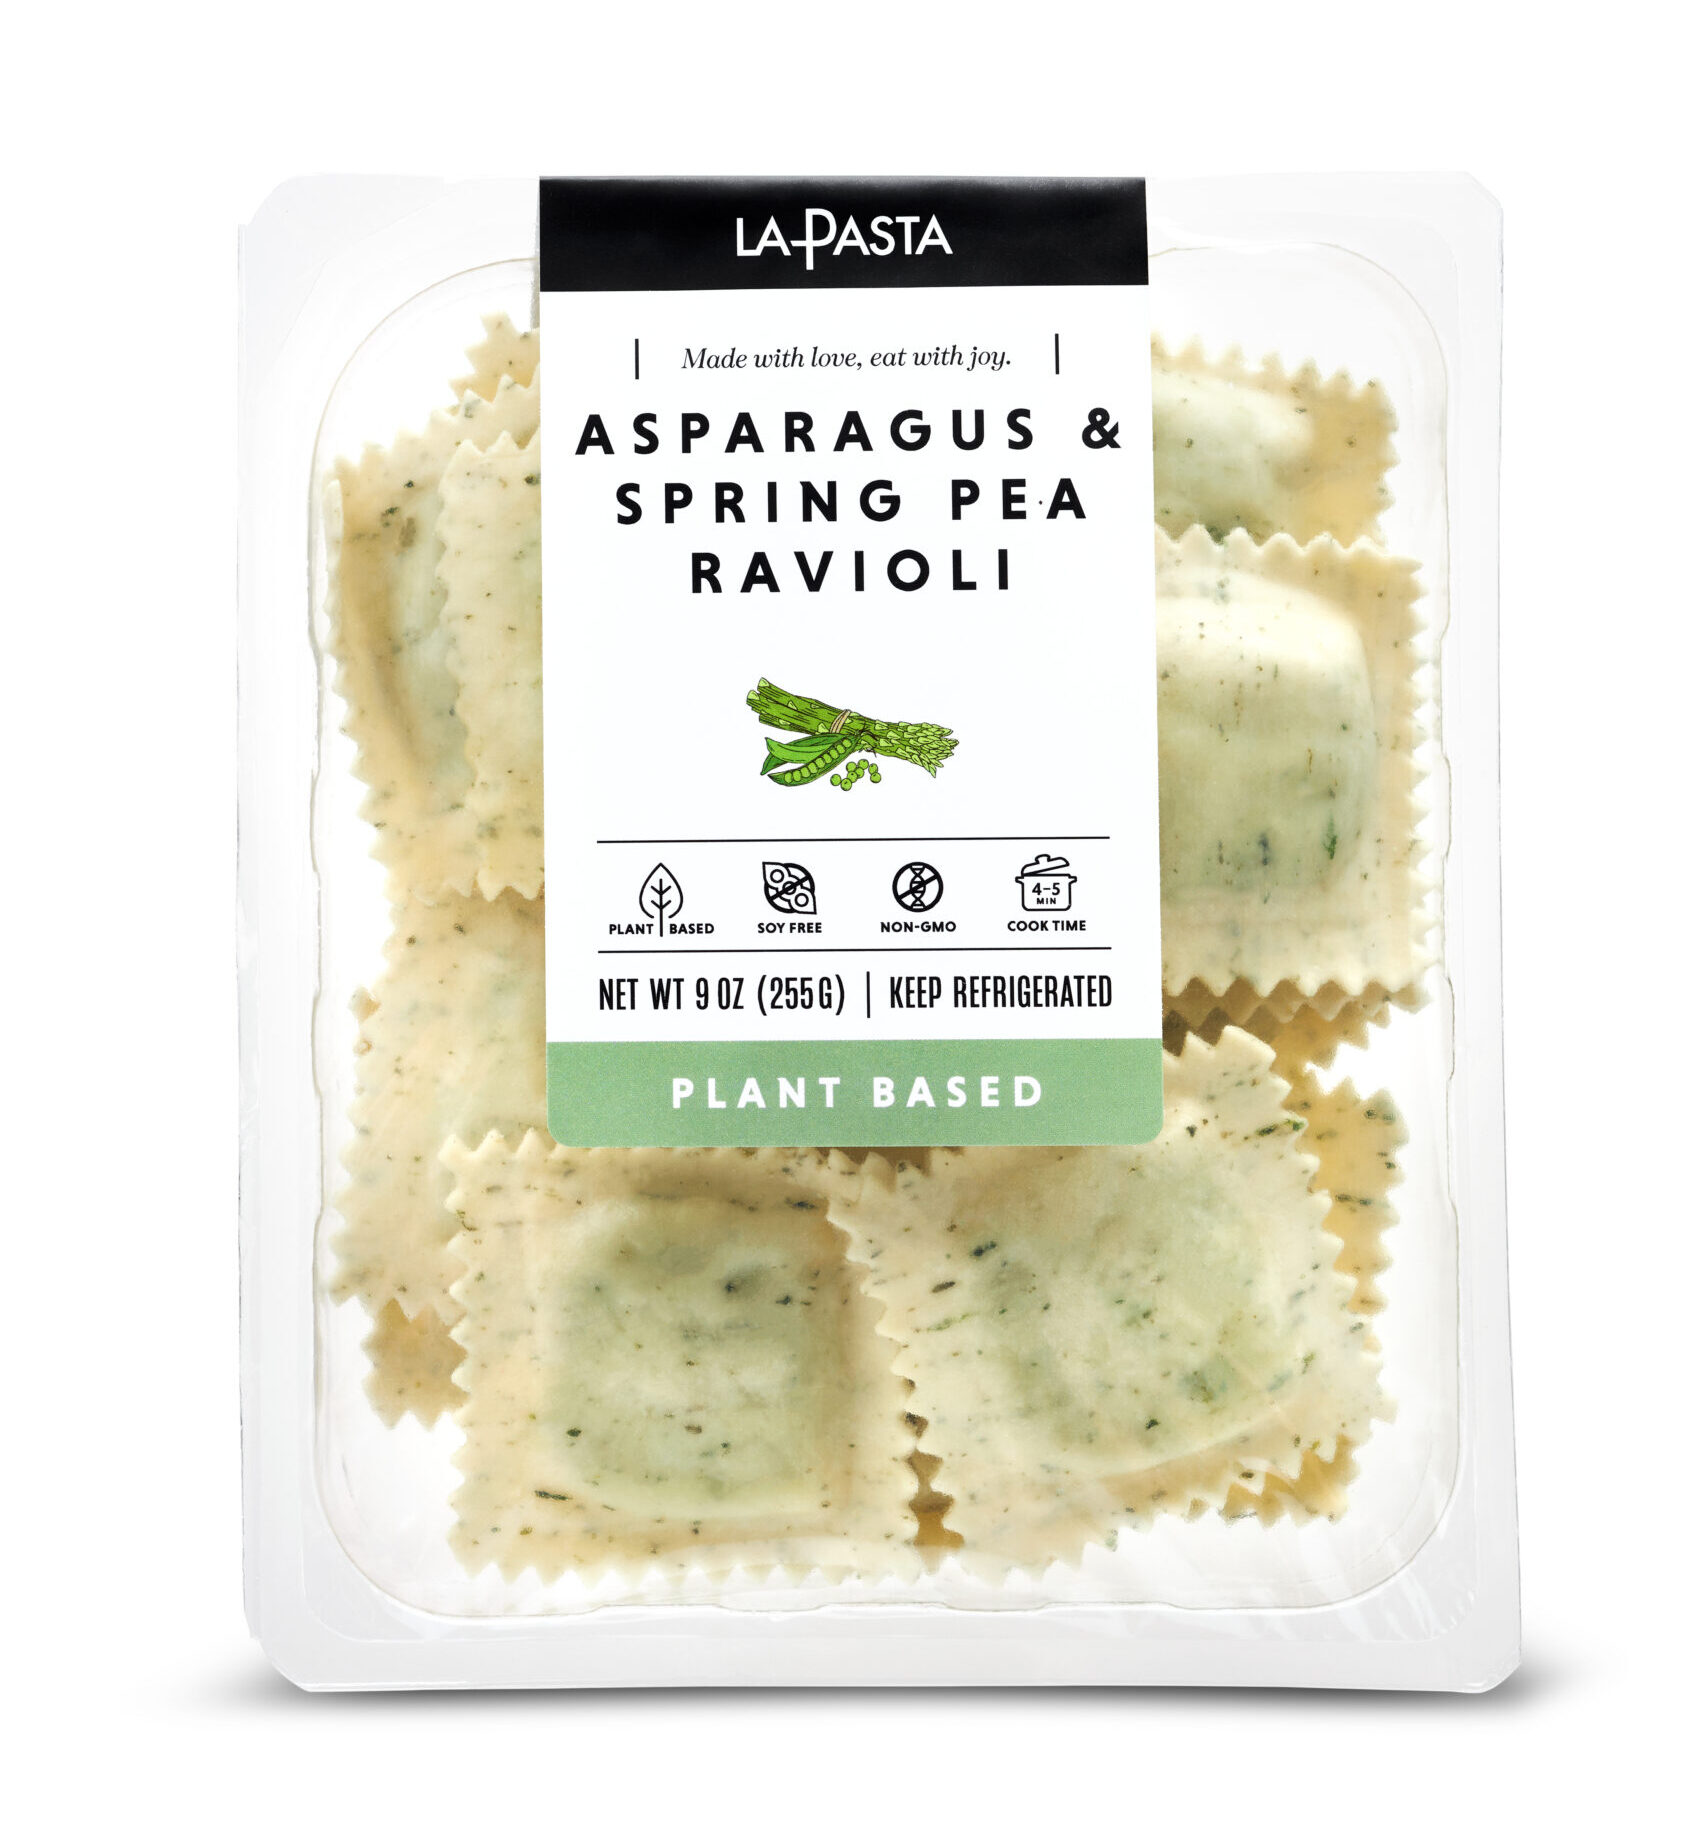 A package of asparagus and spring pea ravioli.